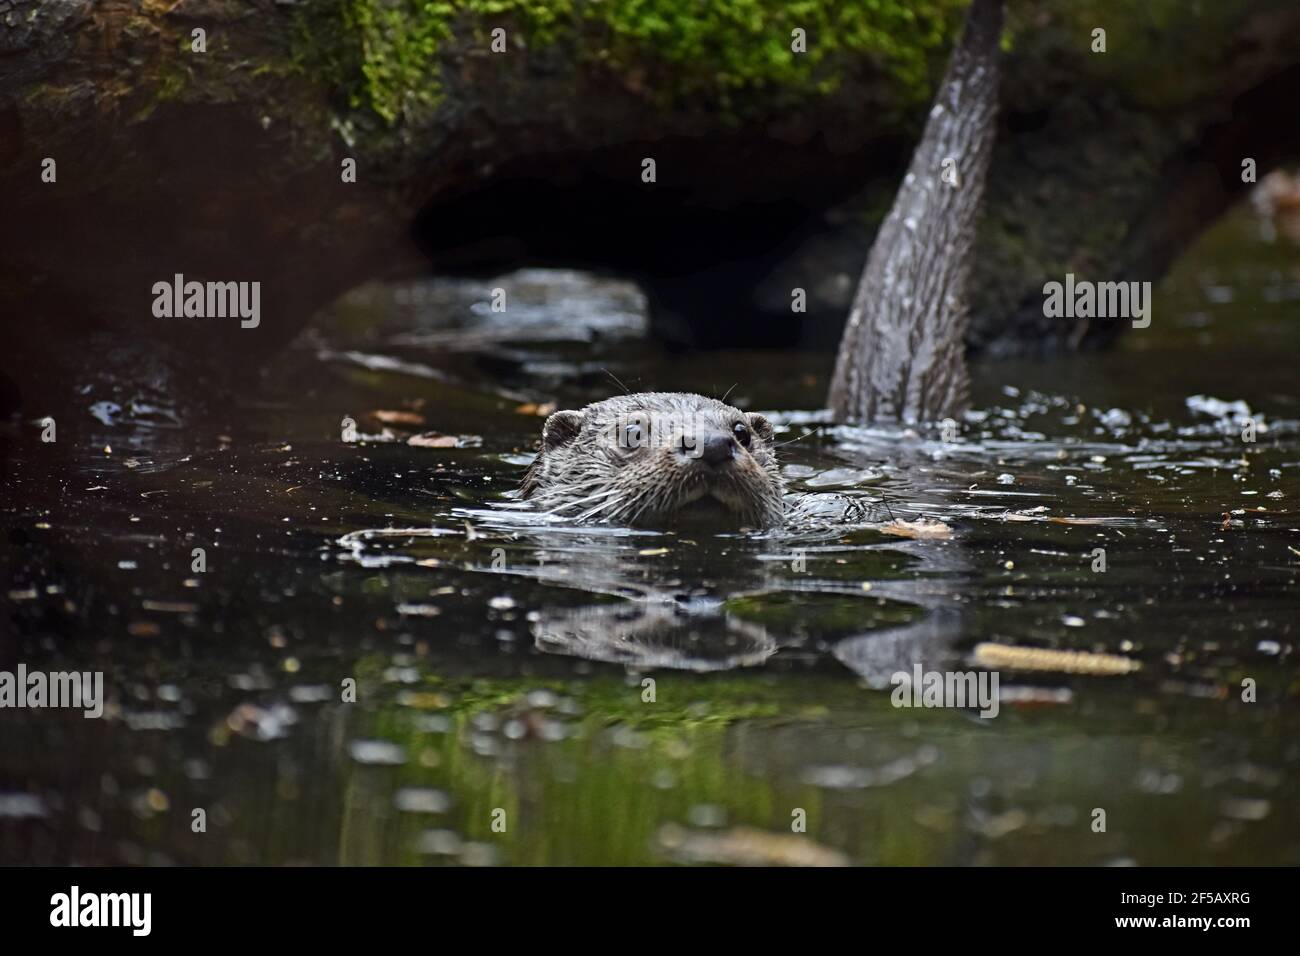 Closeup of an adorable otter swimming in the water in the park Stock Photo